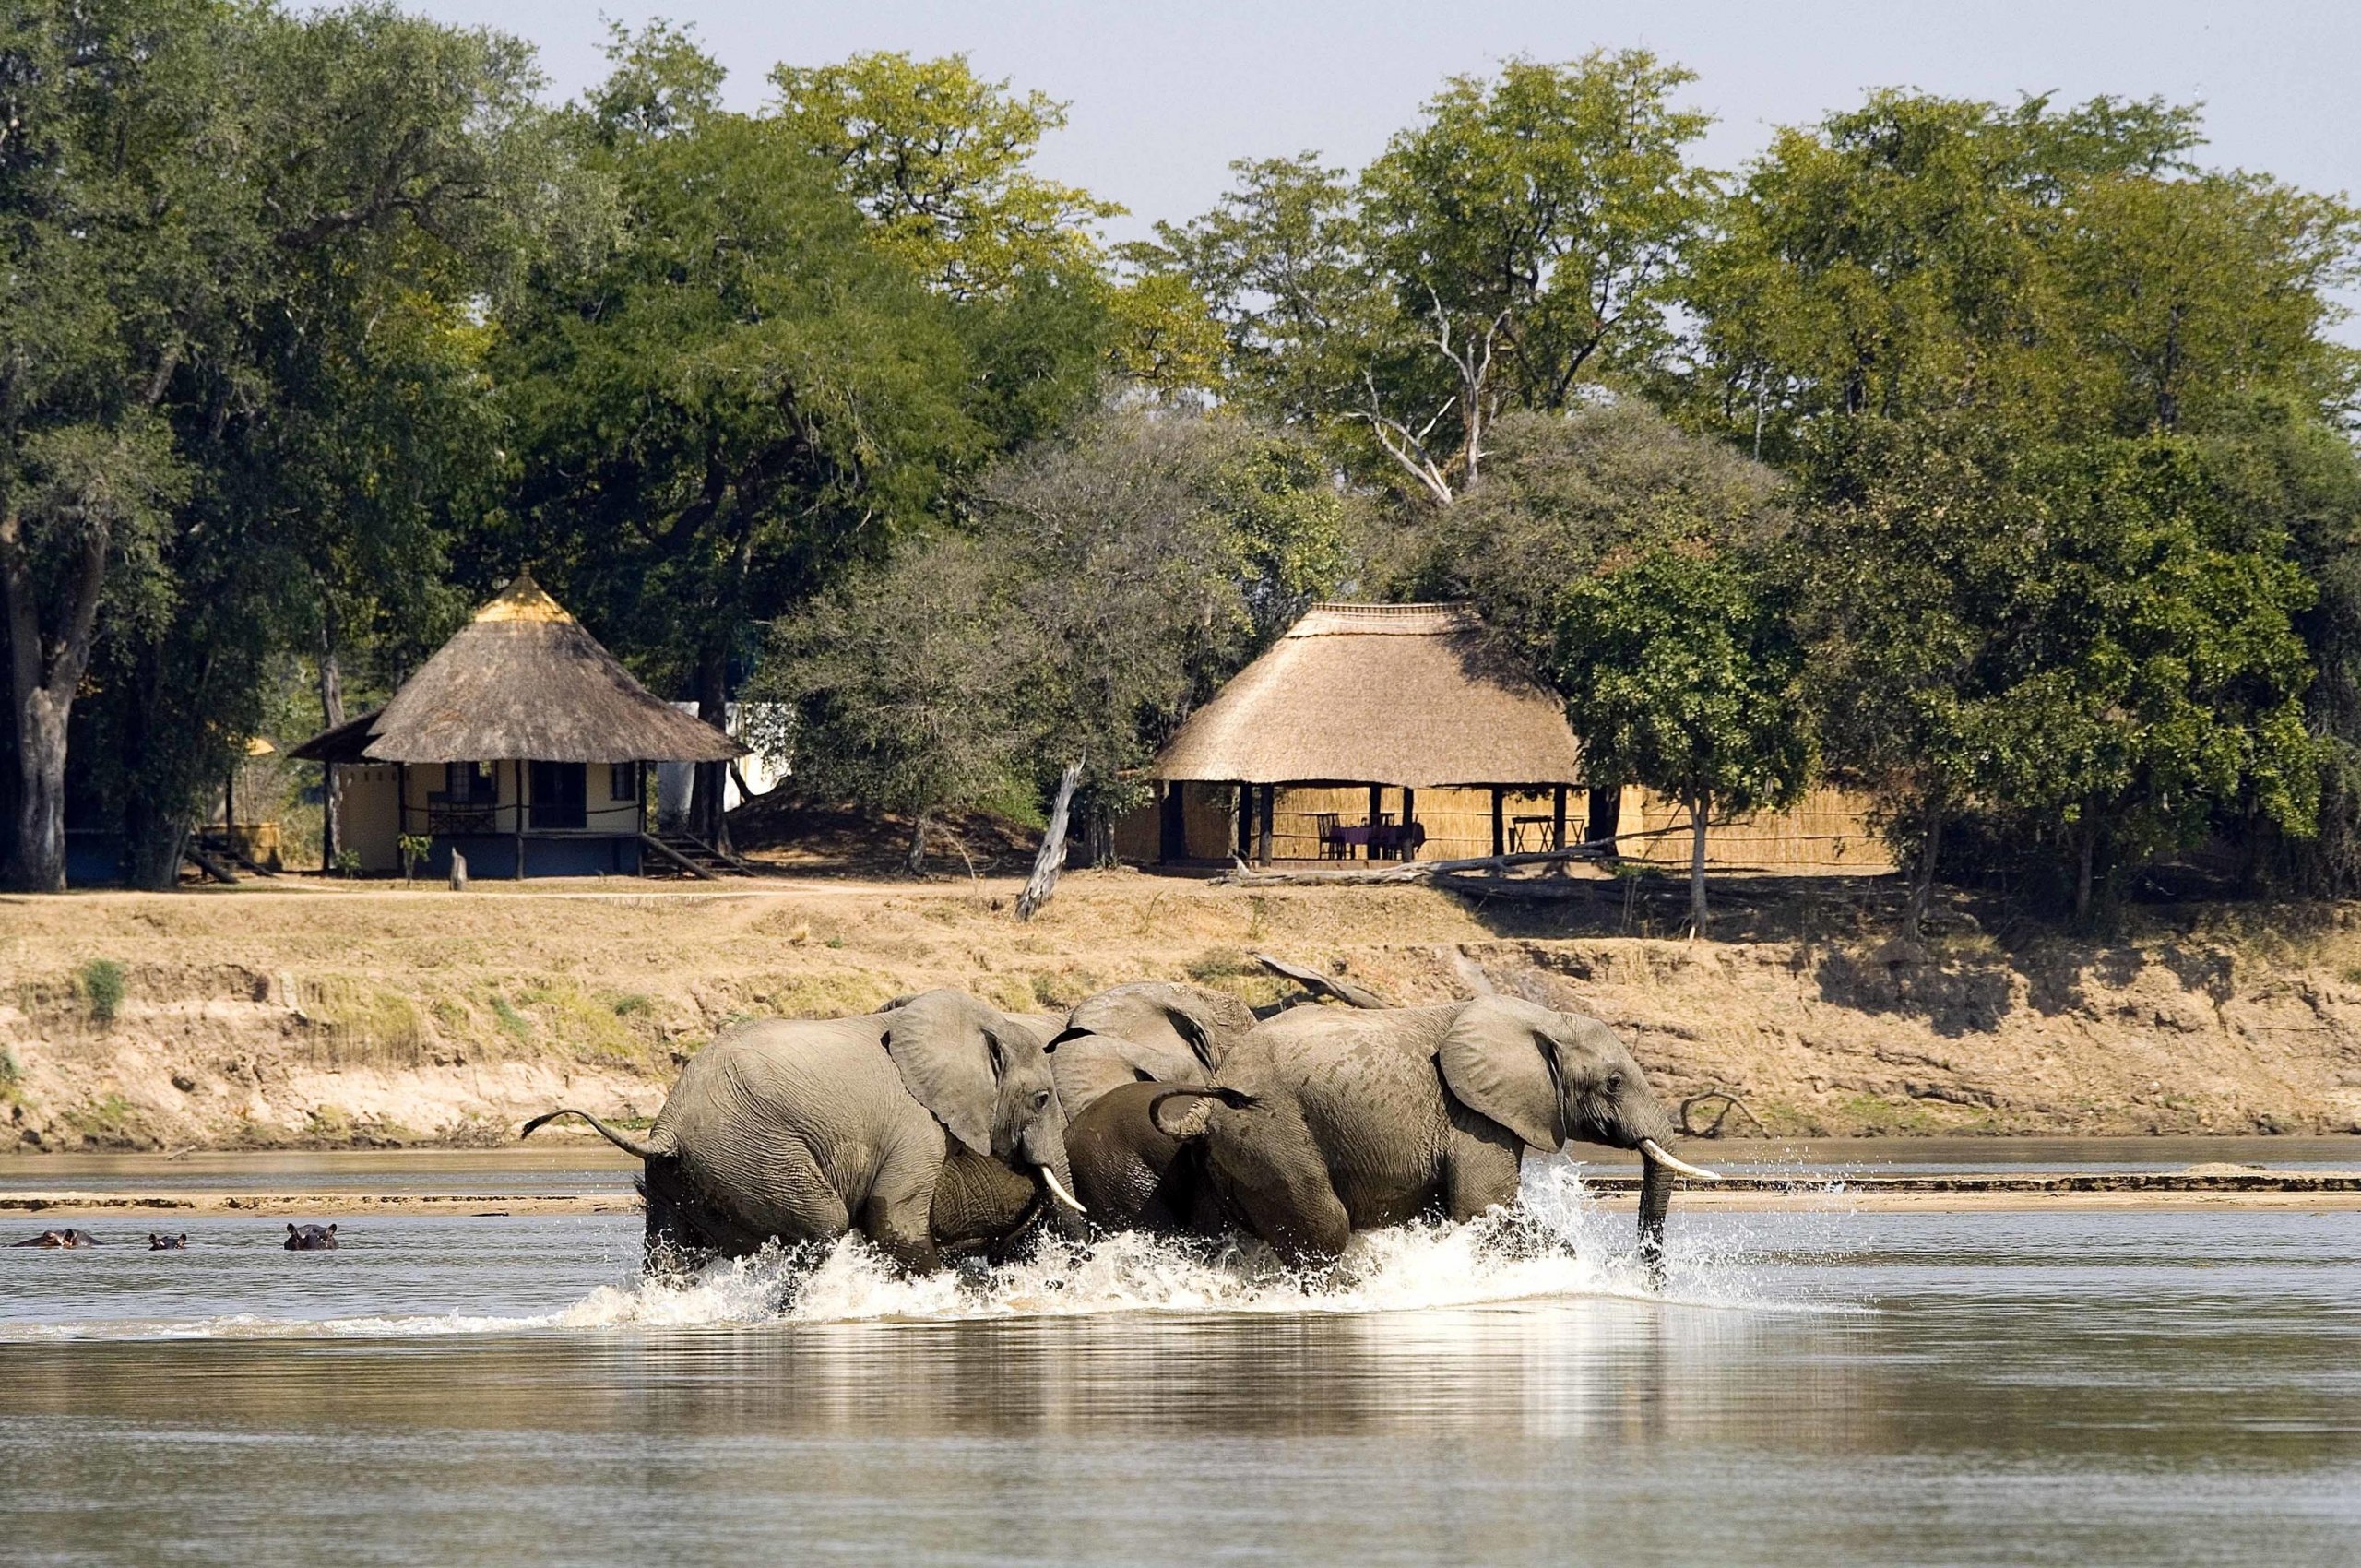 Elephants in front of camp